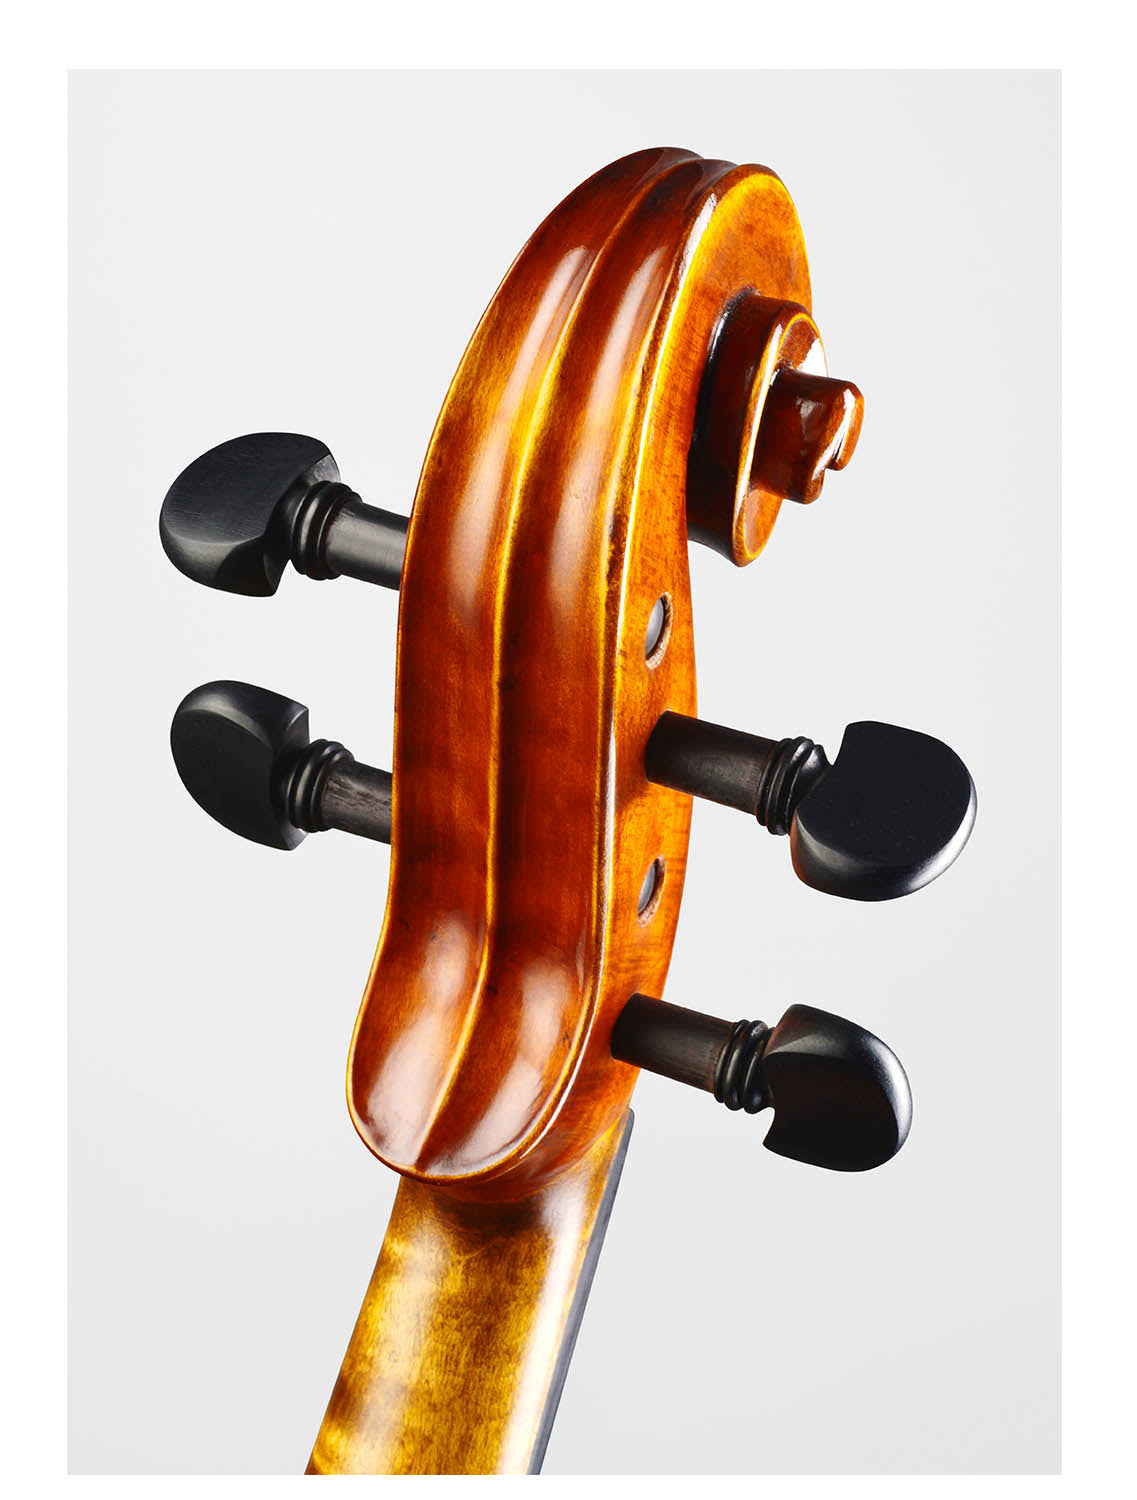 ❤ CONTEMPORARY Violin with a one-piece-maple back #125F CT 